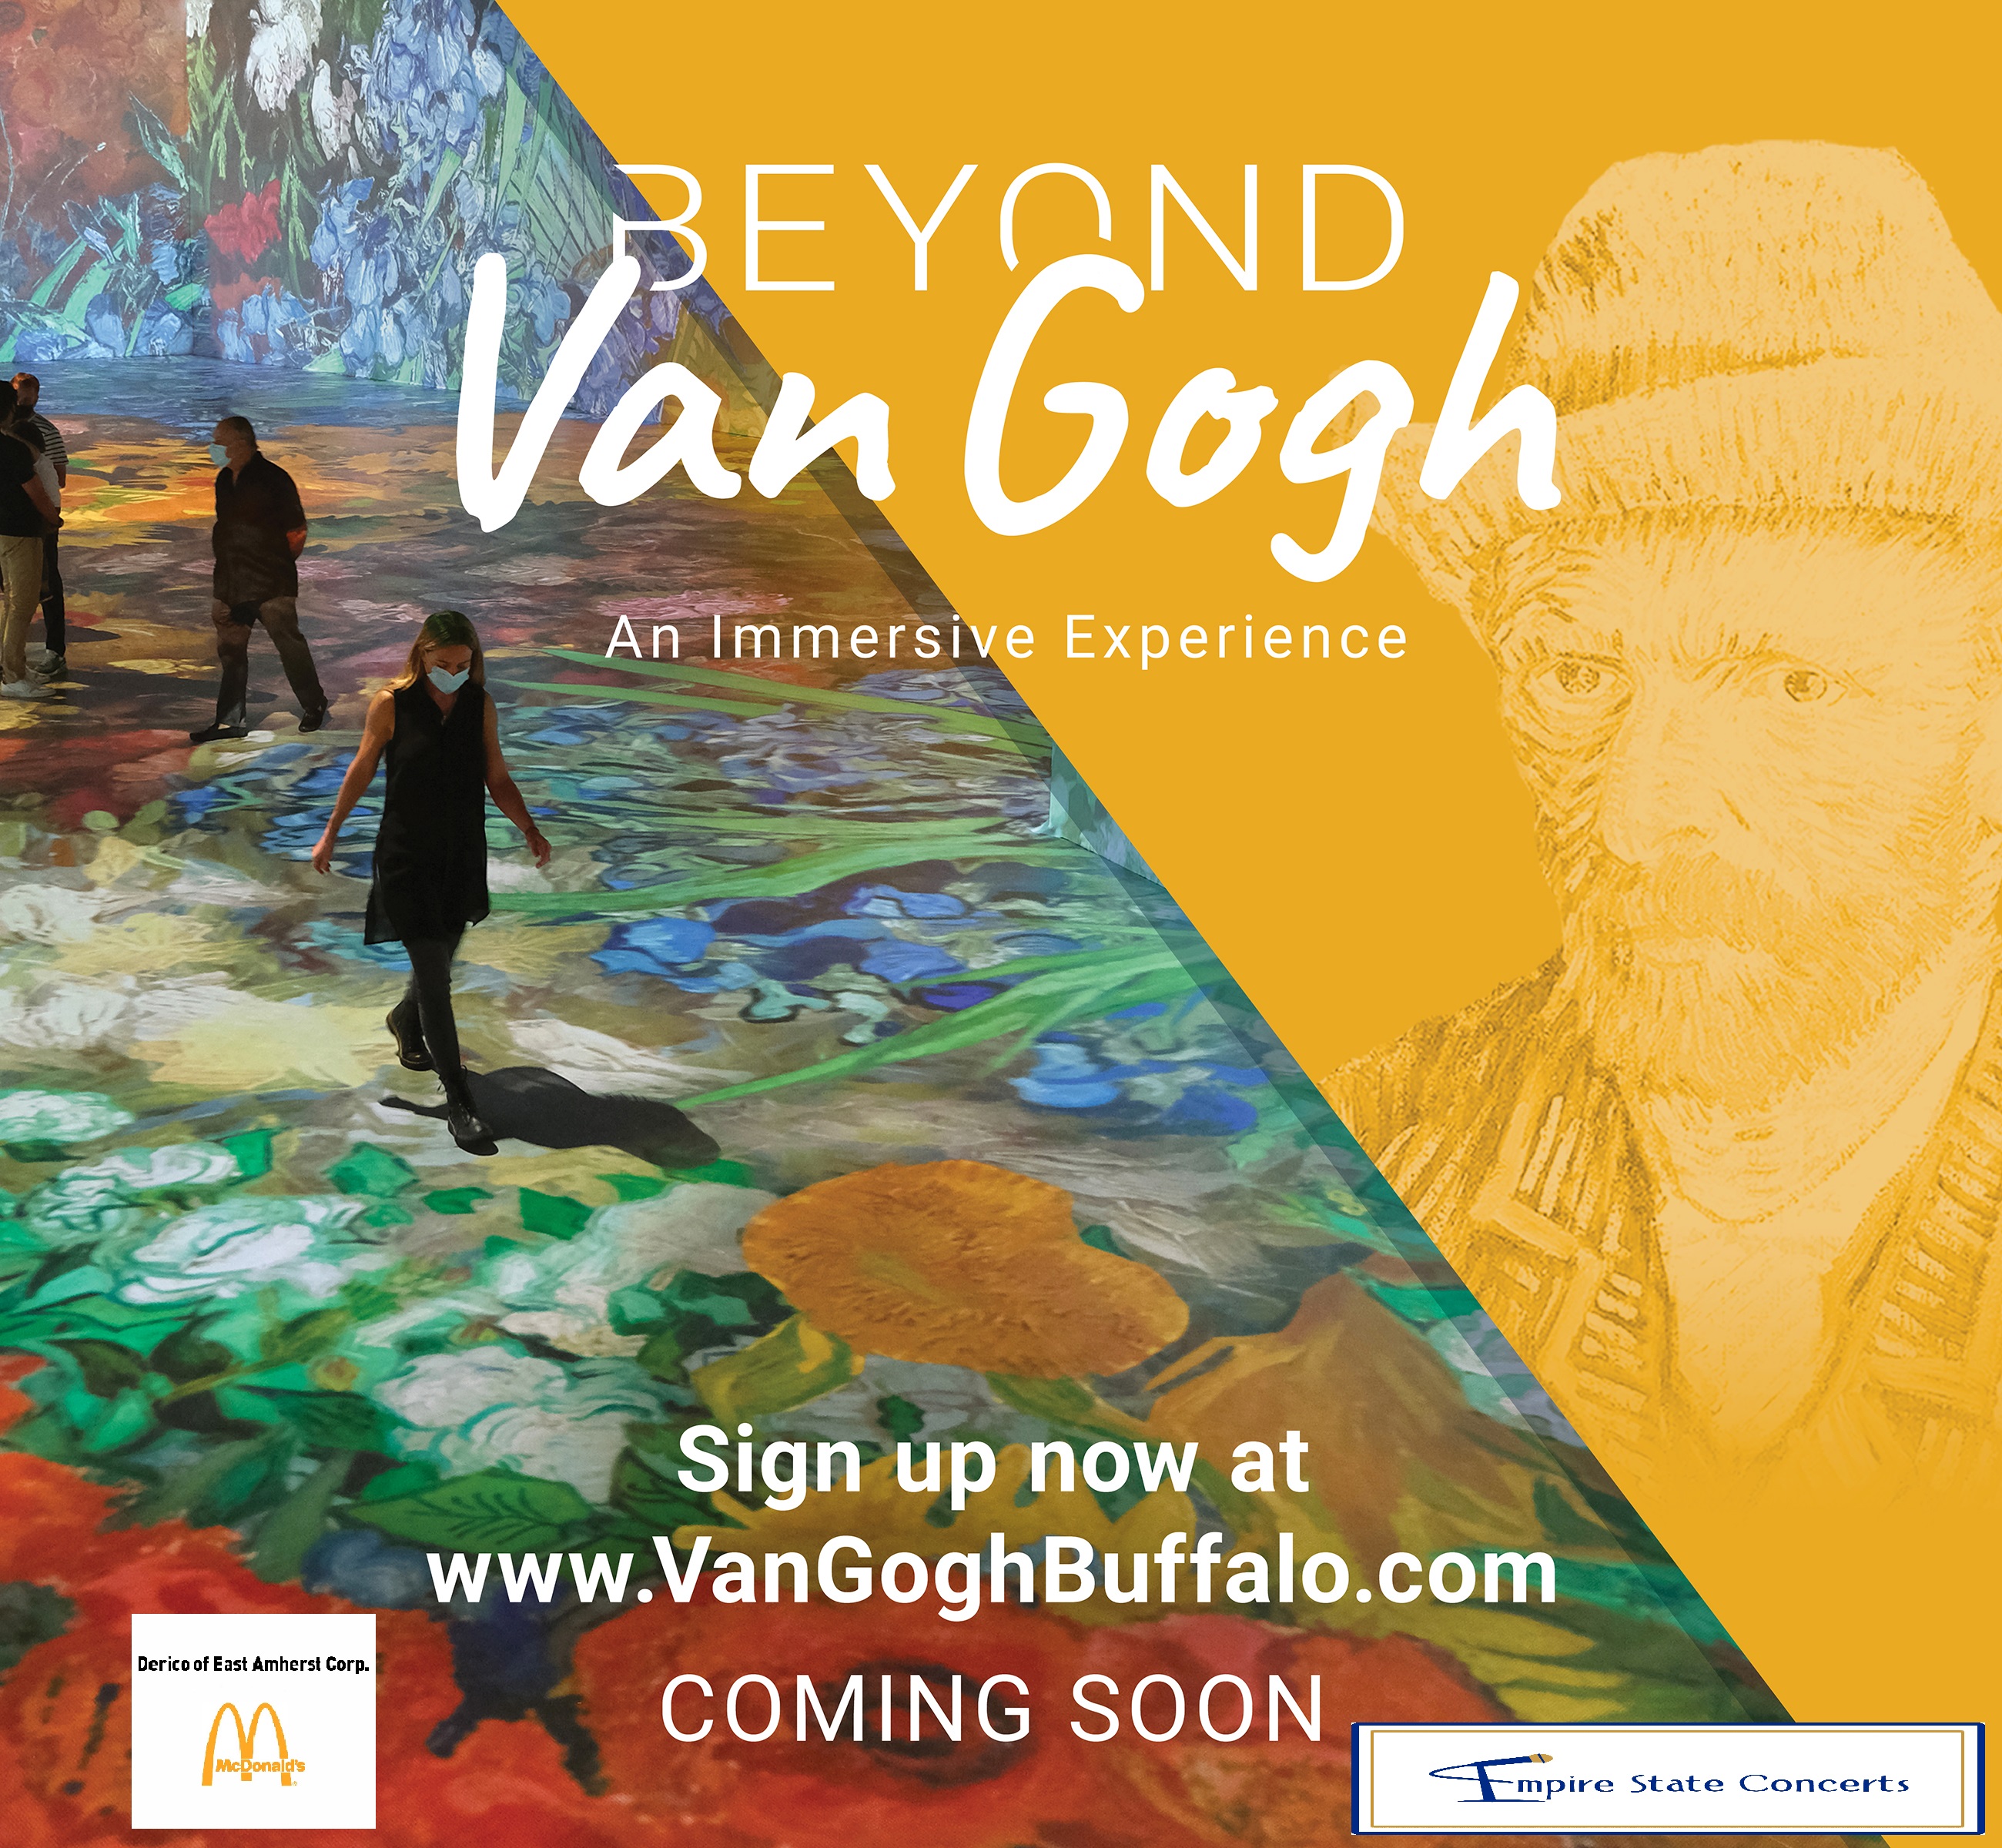 BEYOND VAN GOGH AN ORIGINAL IMMERSIVE EXPERIENCE Empire State Concerts